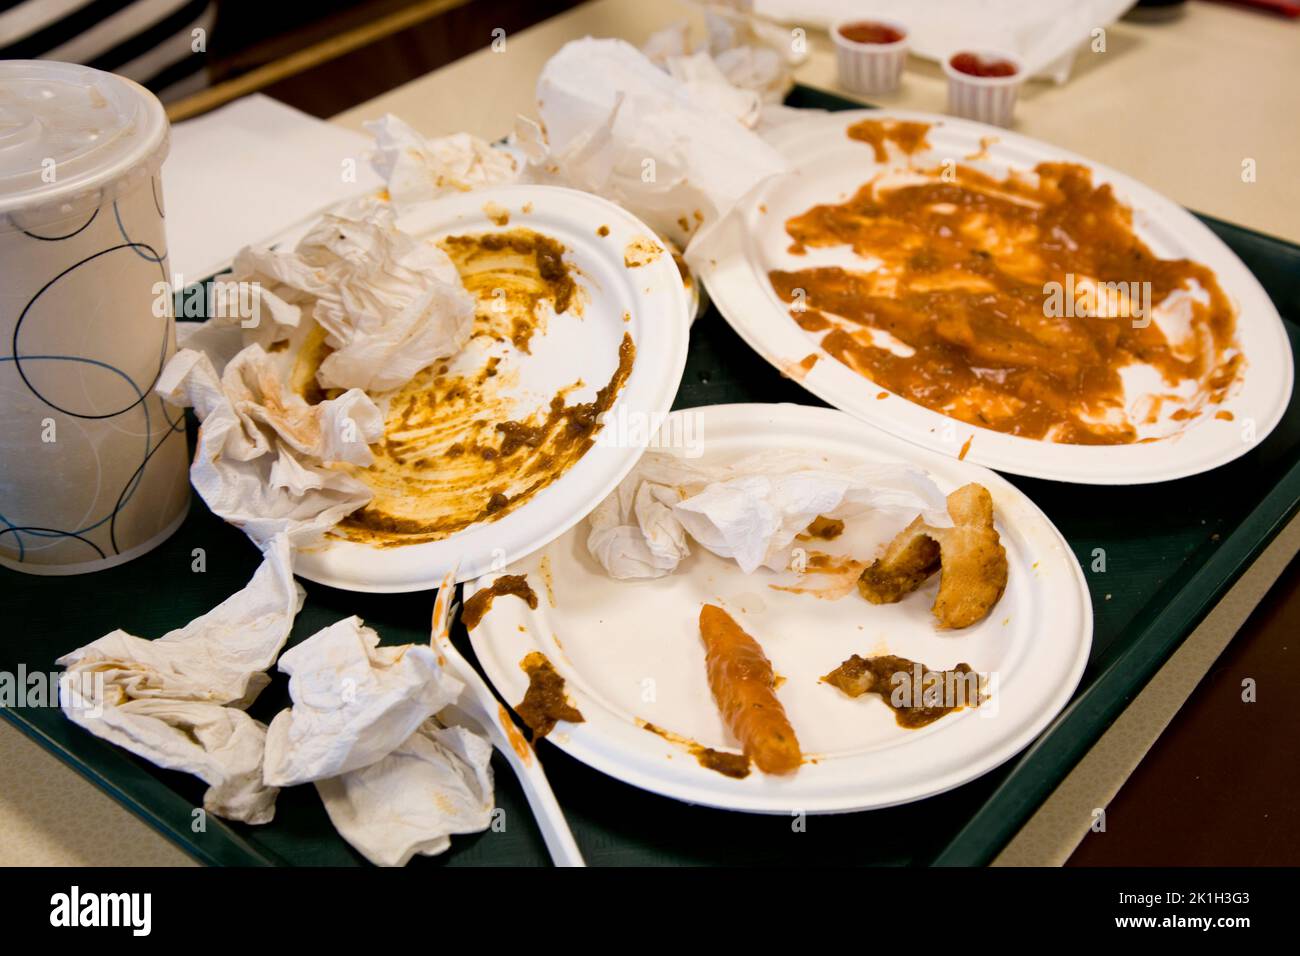 Fast food mess after consumption. Stock Photo